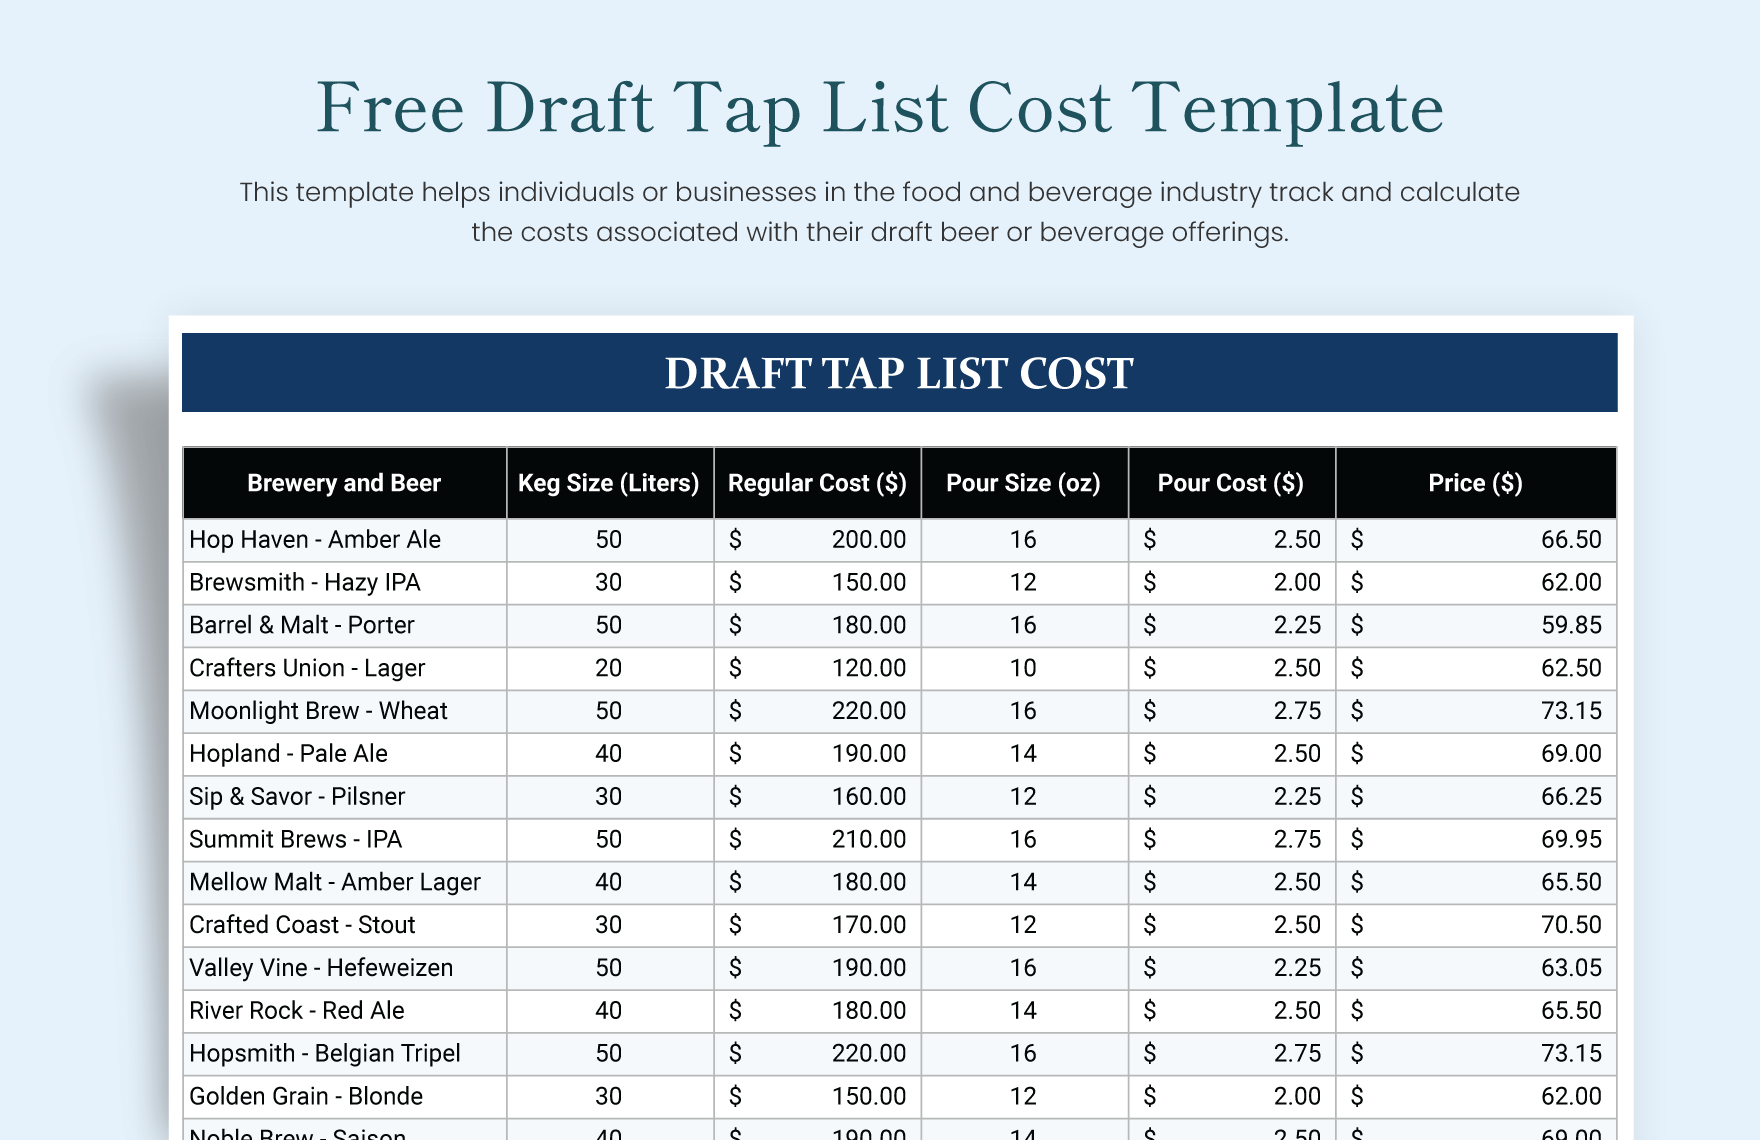 Free Draft Tap List Cost Template